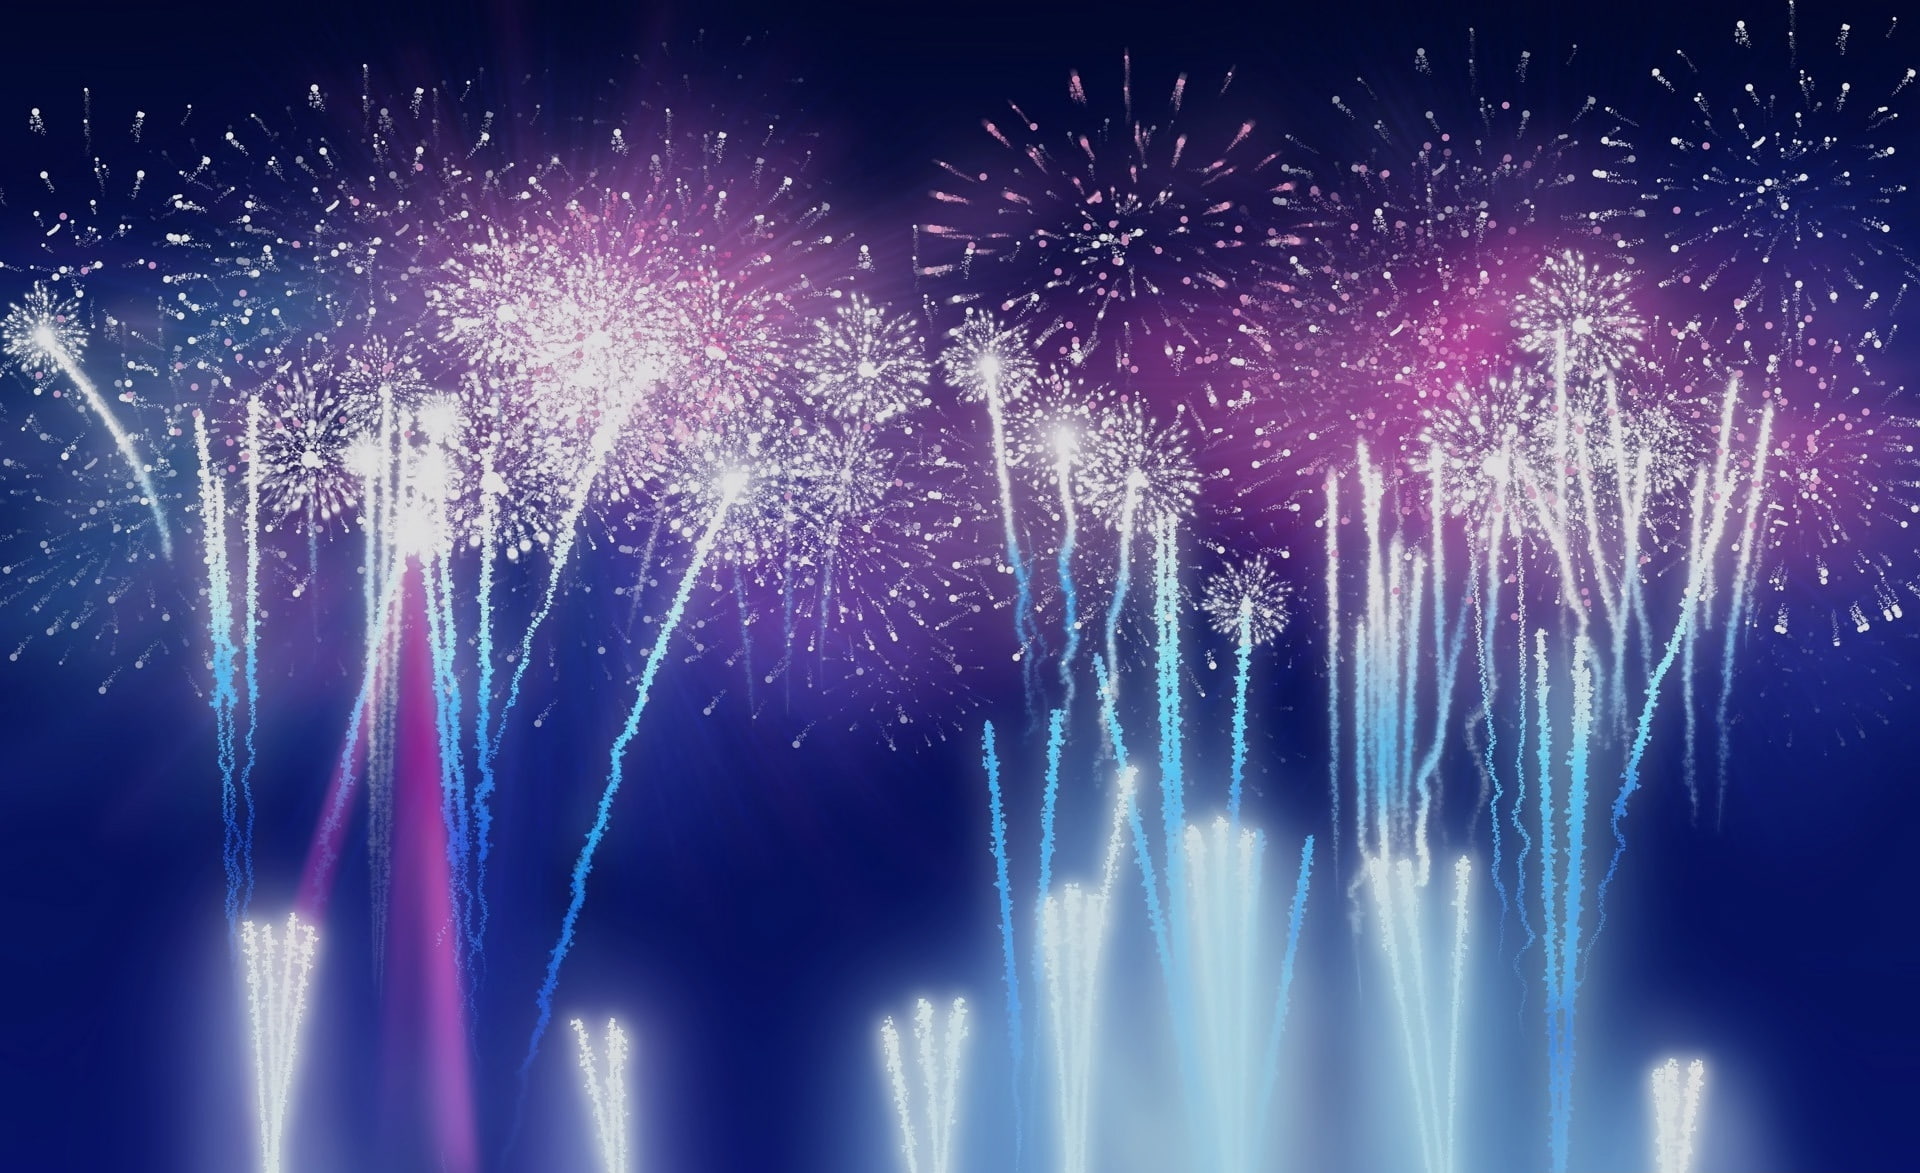 Independence Day Fireworks Background, purple and blue fireworks